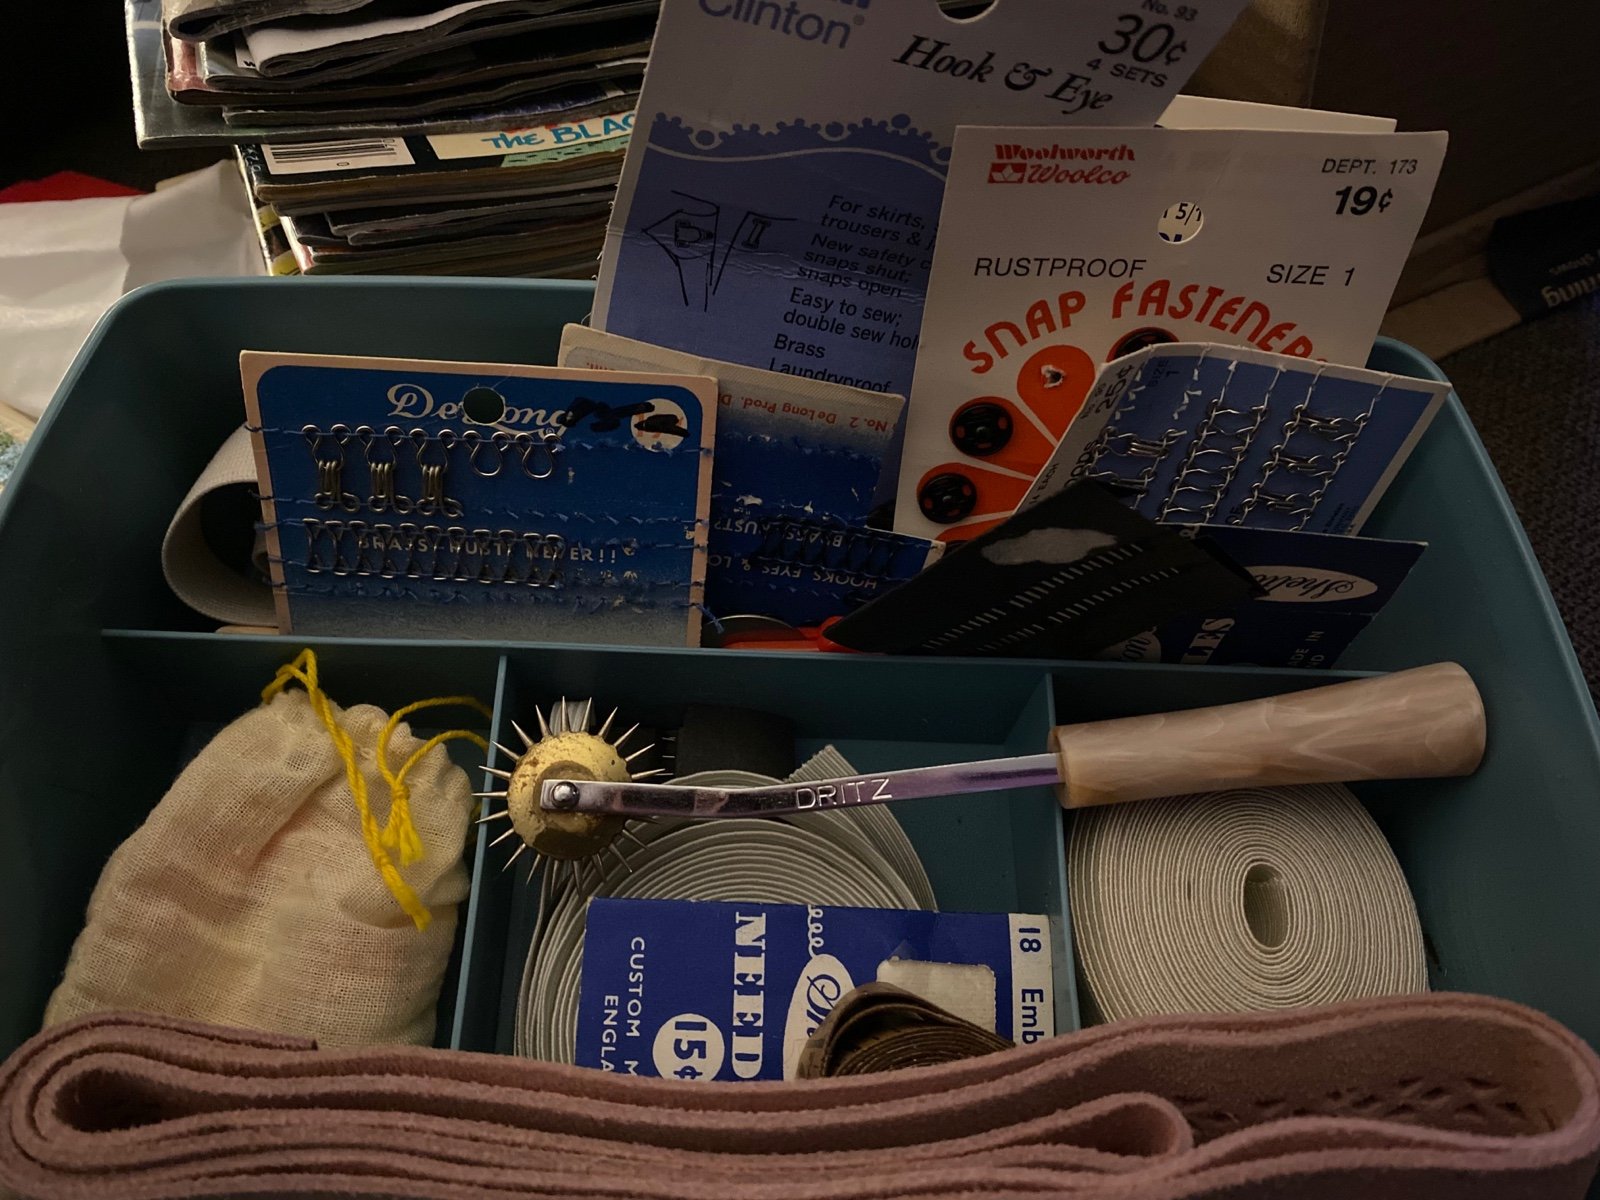 Lot of vintage sewing items IoLhjsXHm